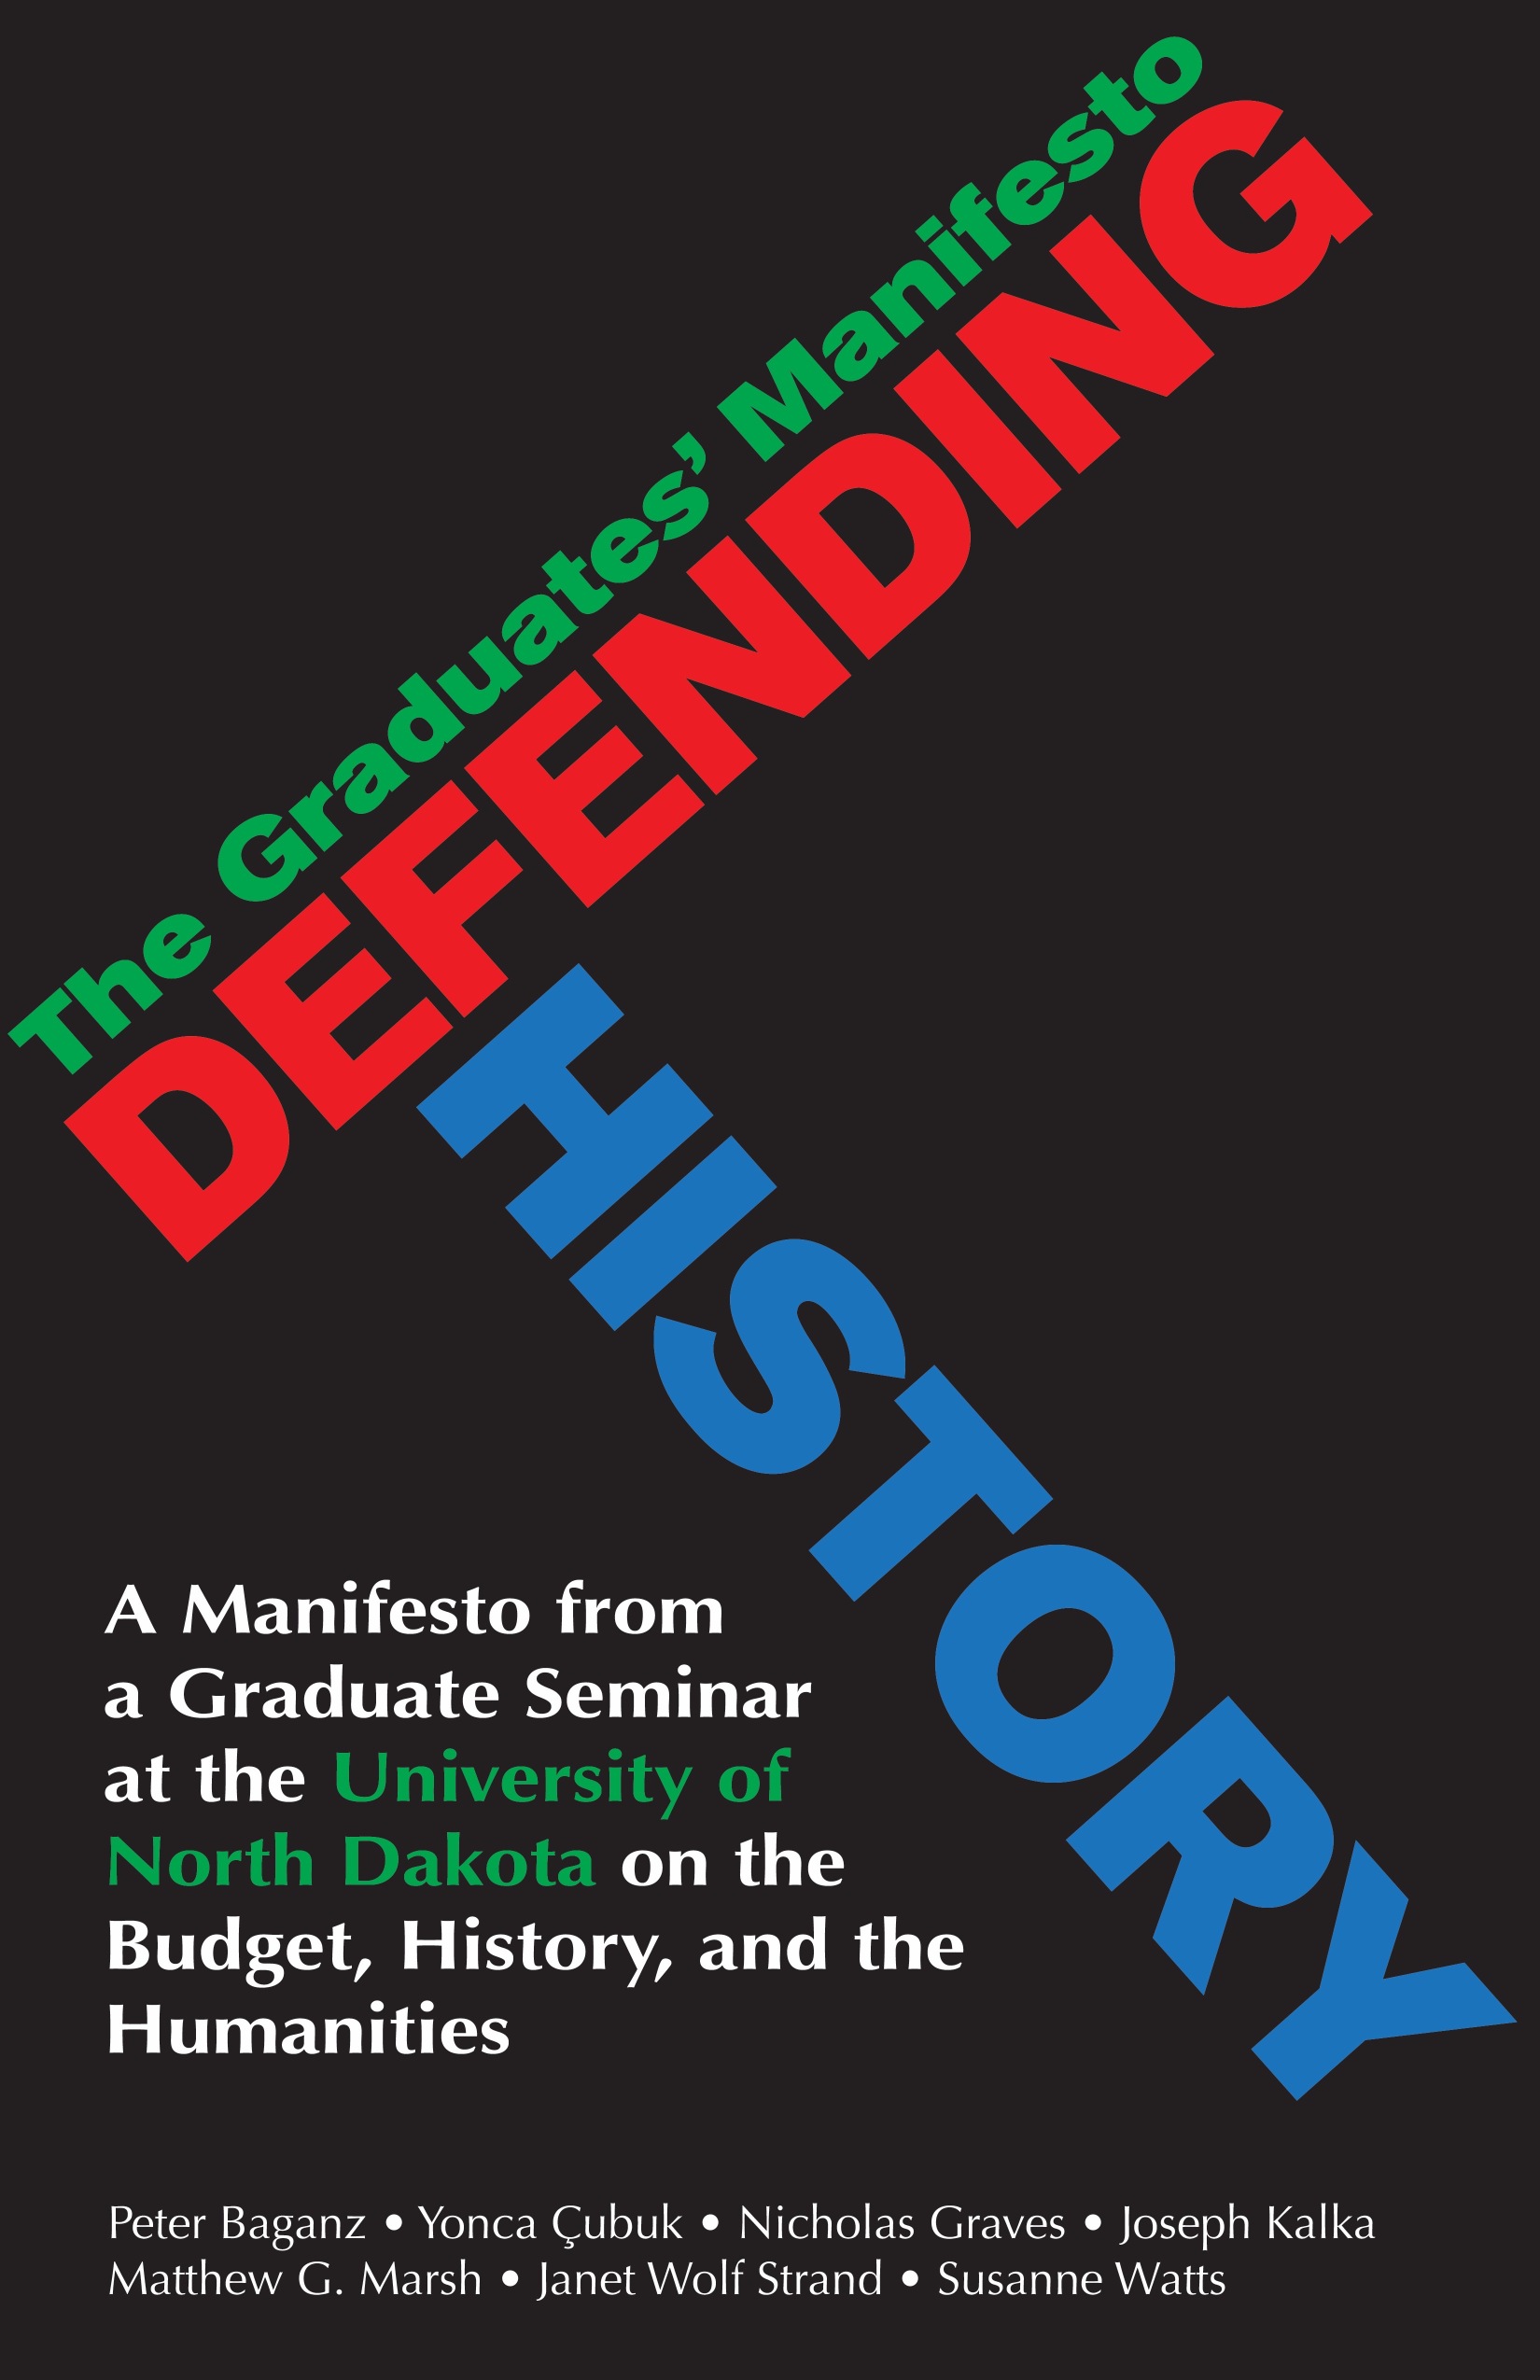 Defendinghistorycover 011.